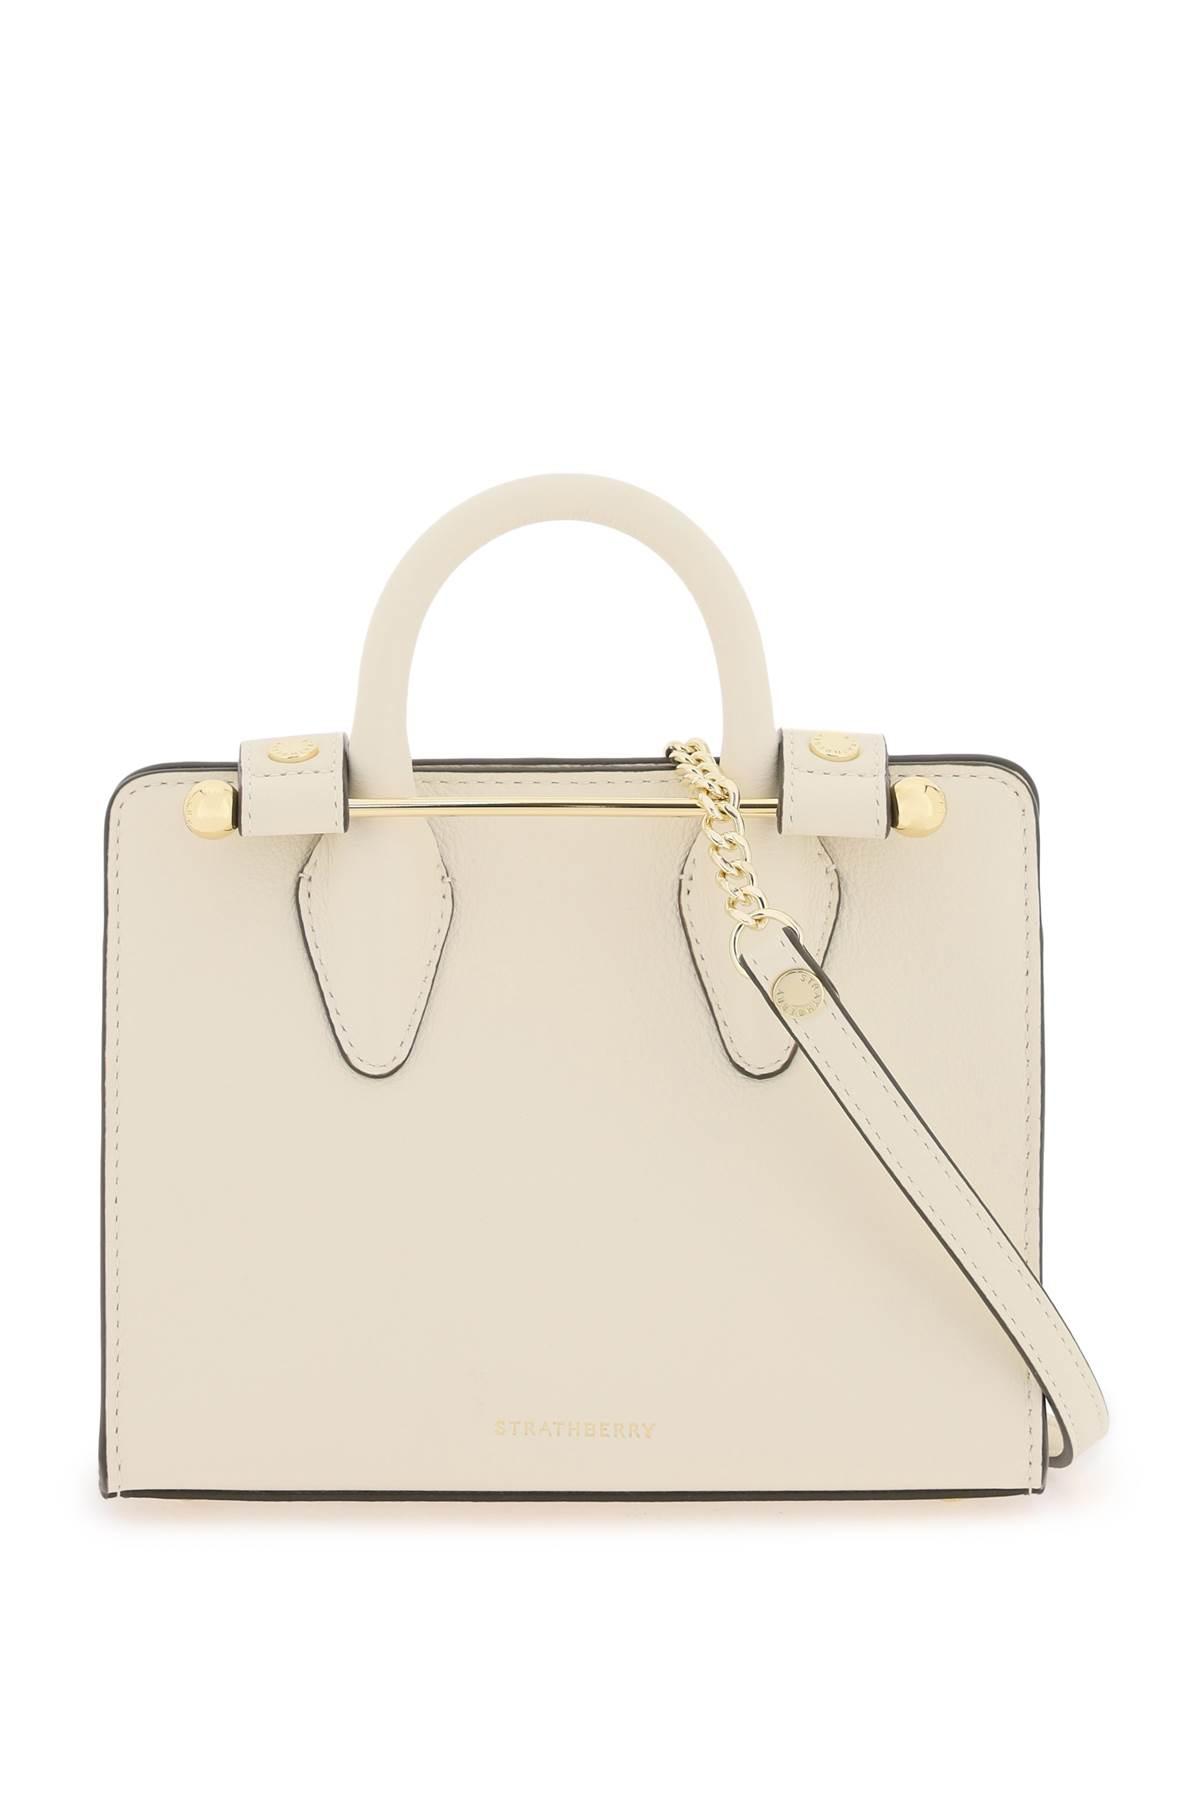 Strathberry 'nano Tote' Bag in Natural | Lyst